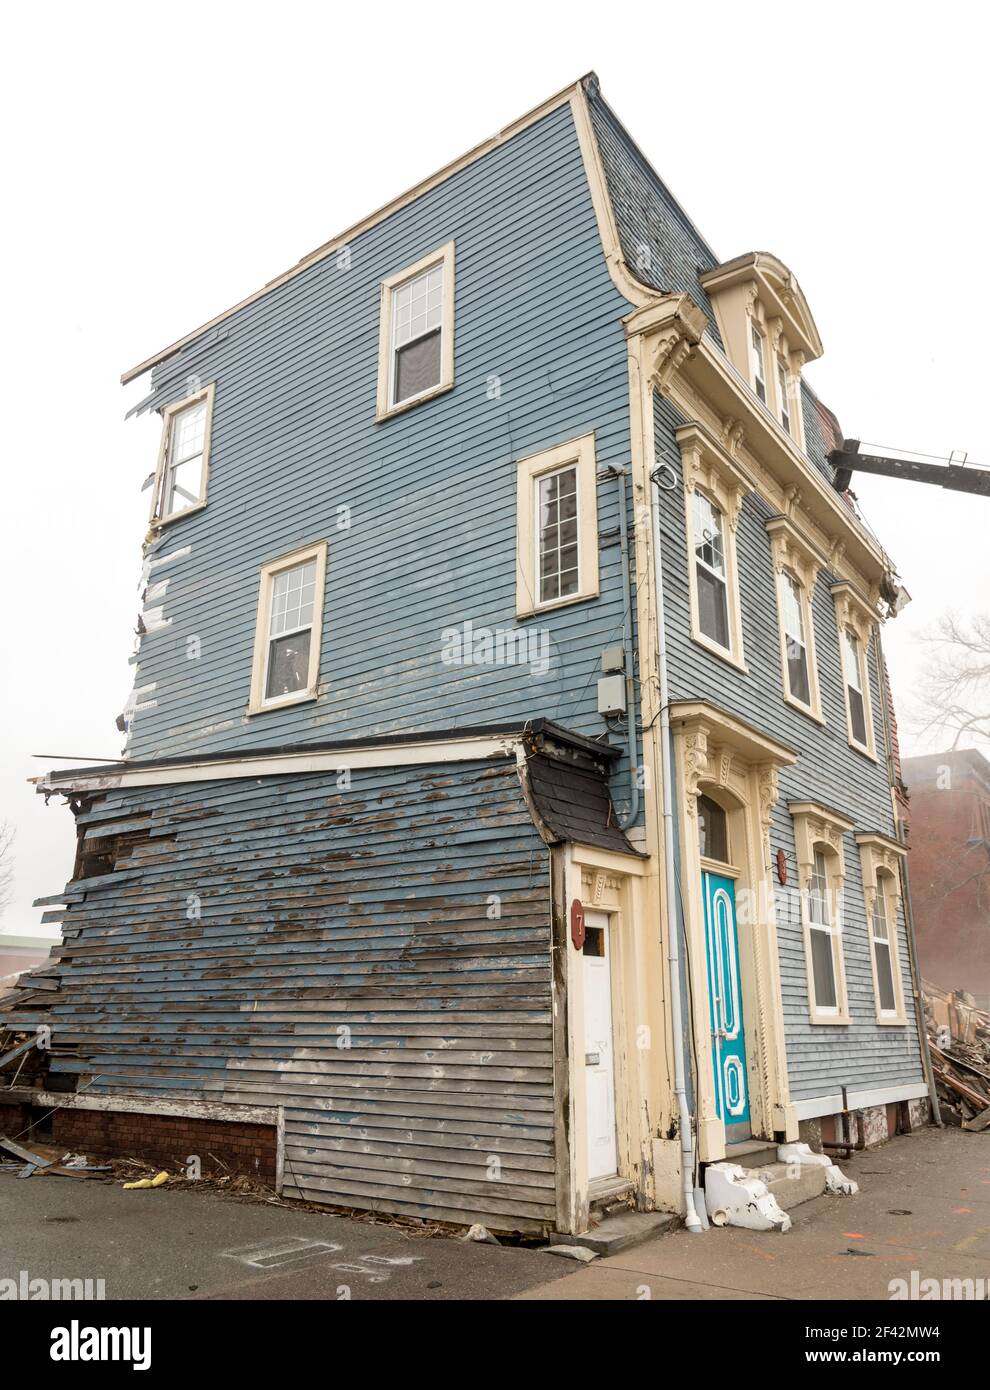 Saint John, New Brunswick, Canada - April 8, 2017: The historic 'jellybean' houses are demolished. These houses survived the Great Fire of 1877. Stock Photo